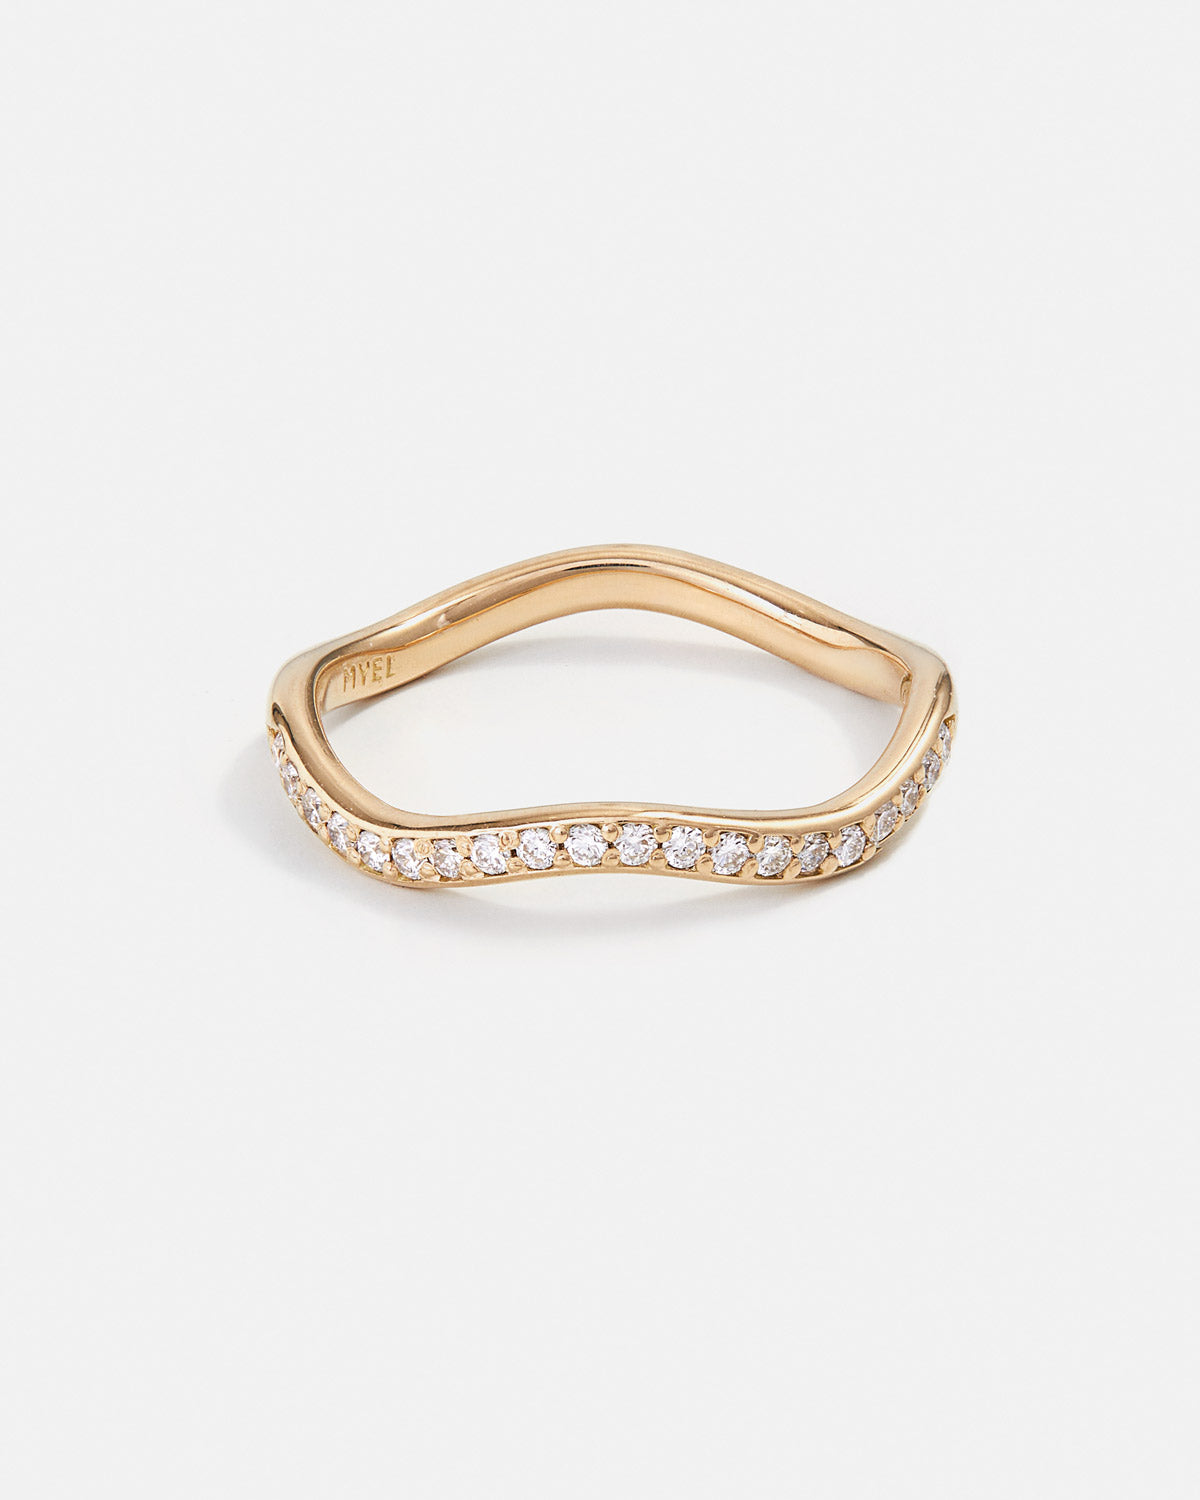 Custom Ring - Pavé Wave Ring in Fairmined Gold with Lab-grown Diamonds